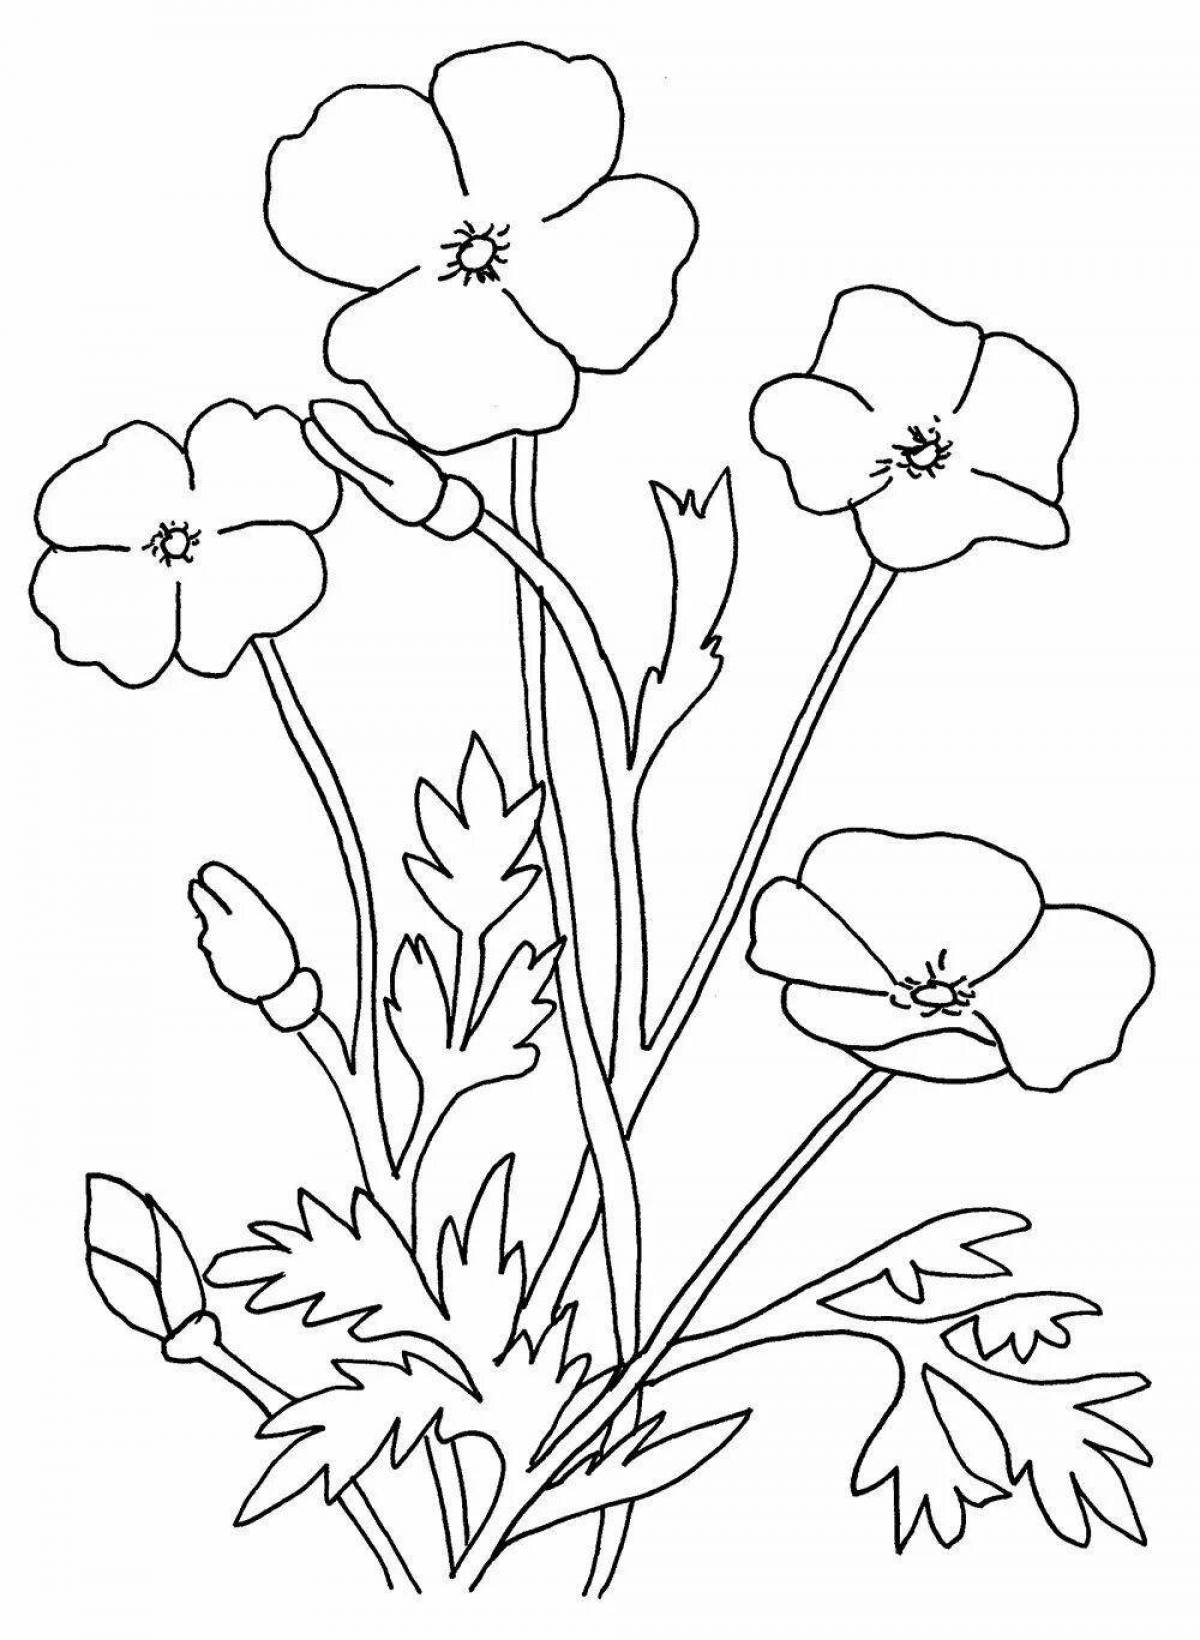 Coloring page nice poppy flower